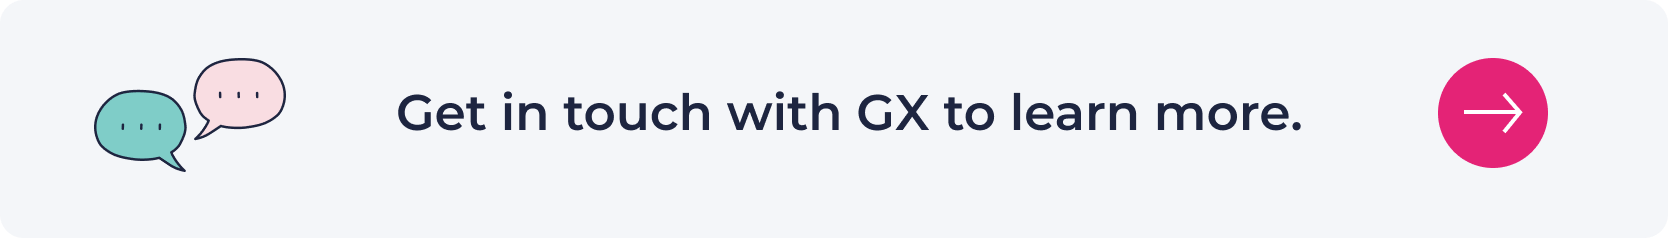 Get in touch with GX to learn more